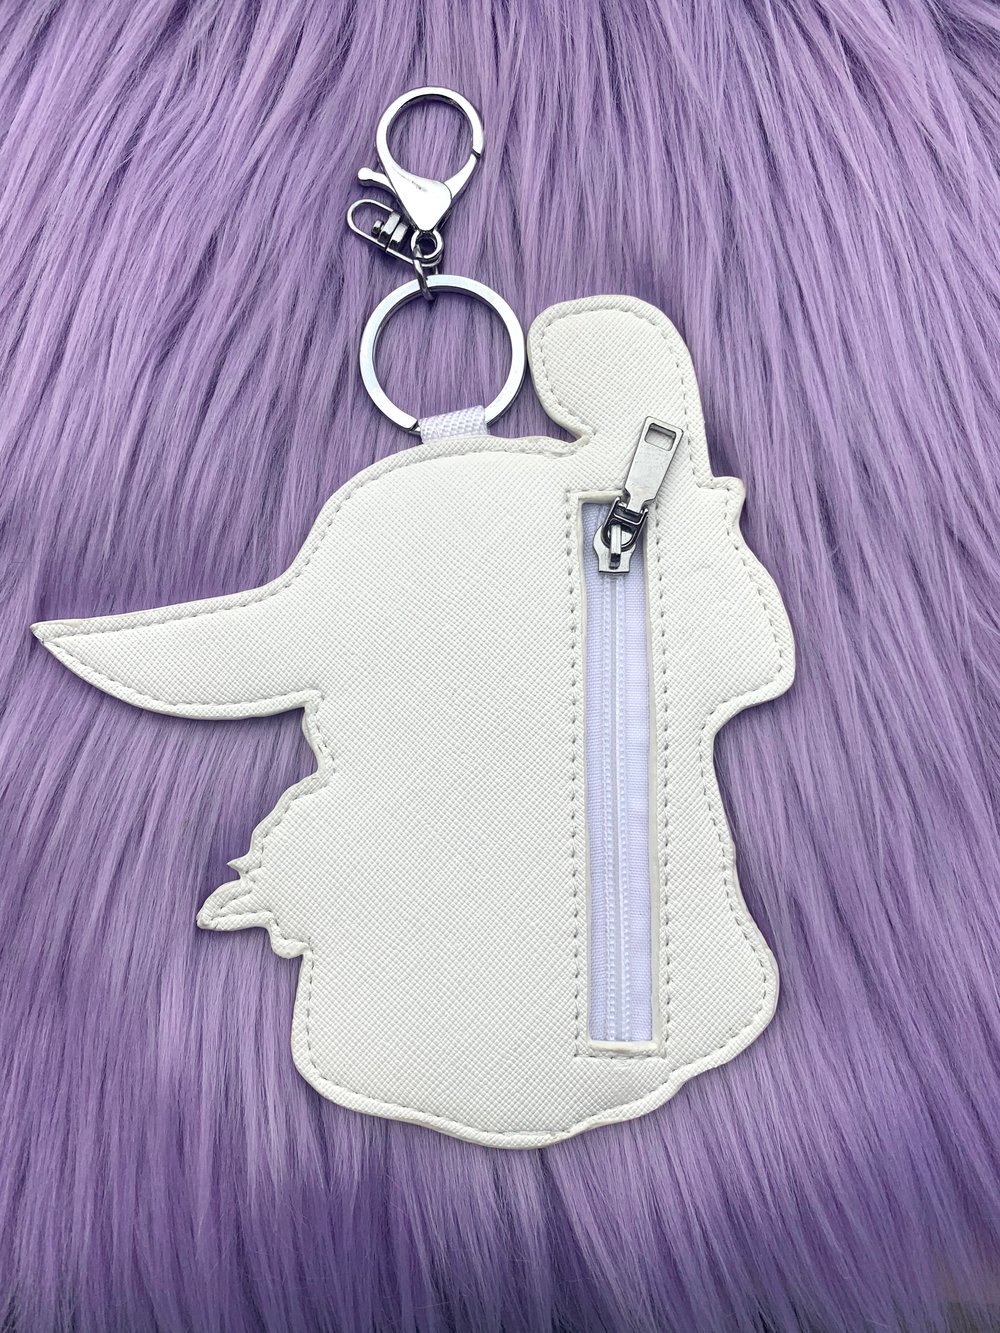 Baby Yoda Army Coin Pouch 